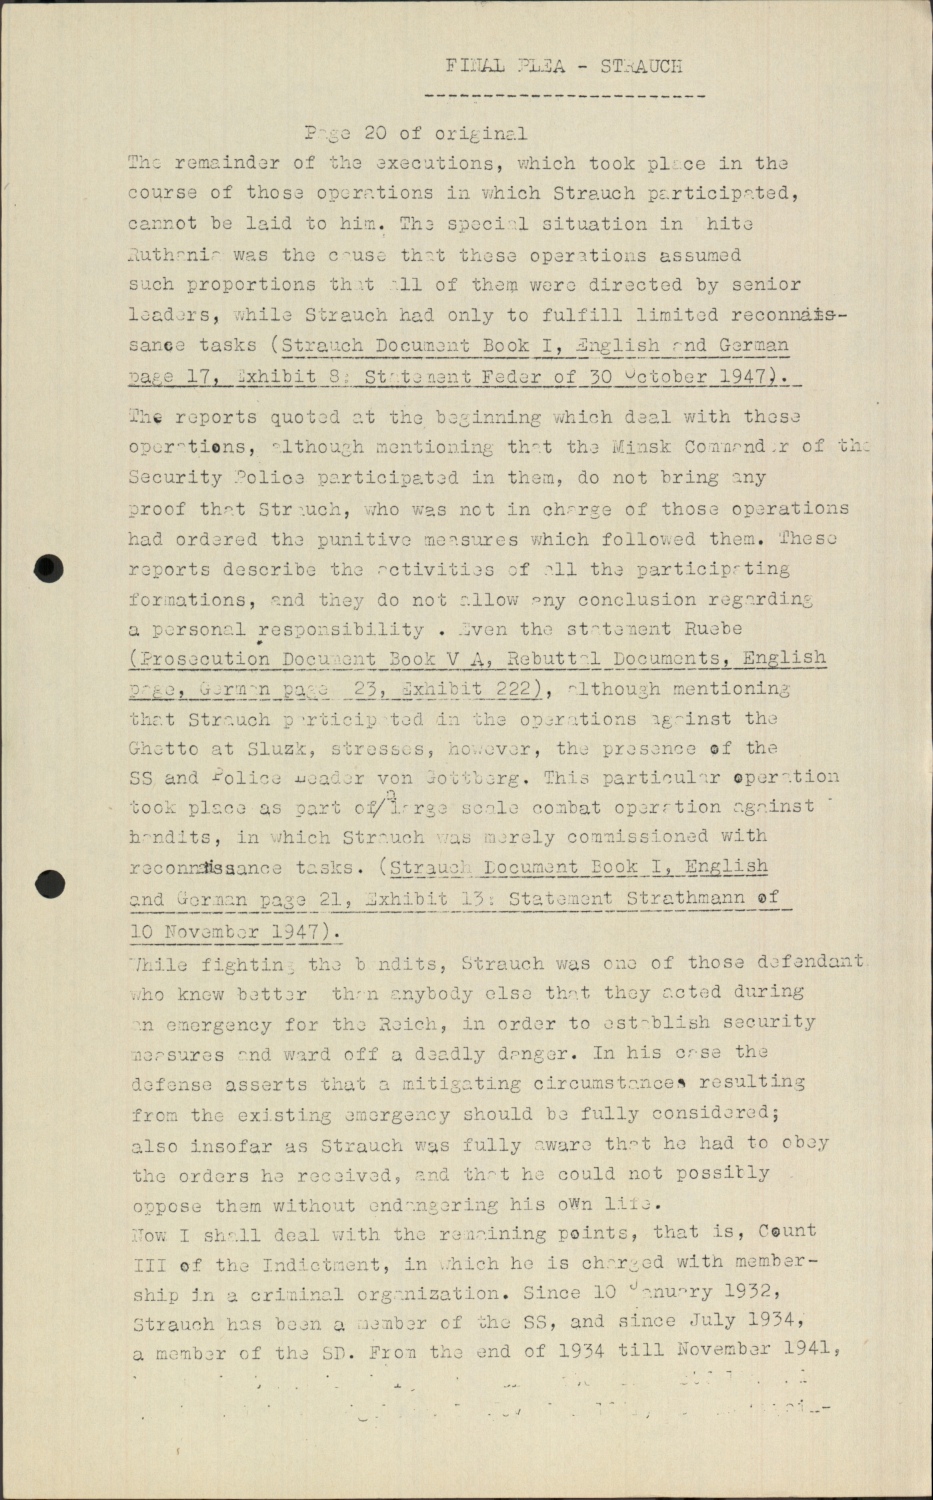 Scanned document page 40